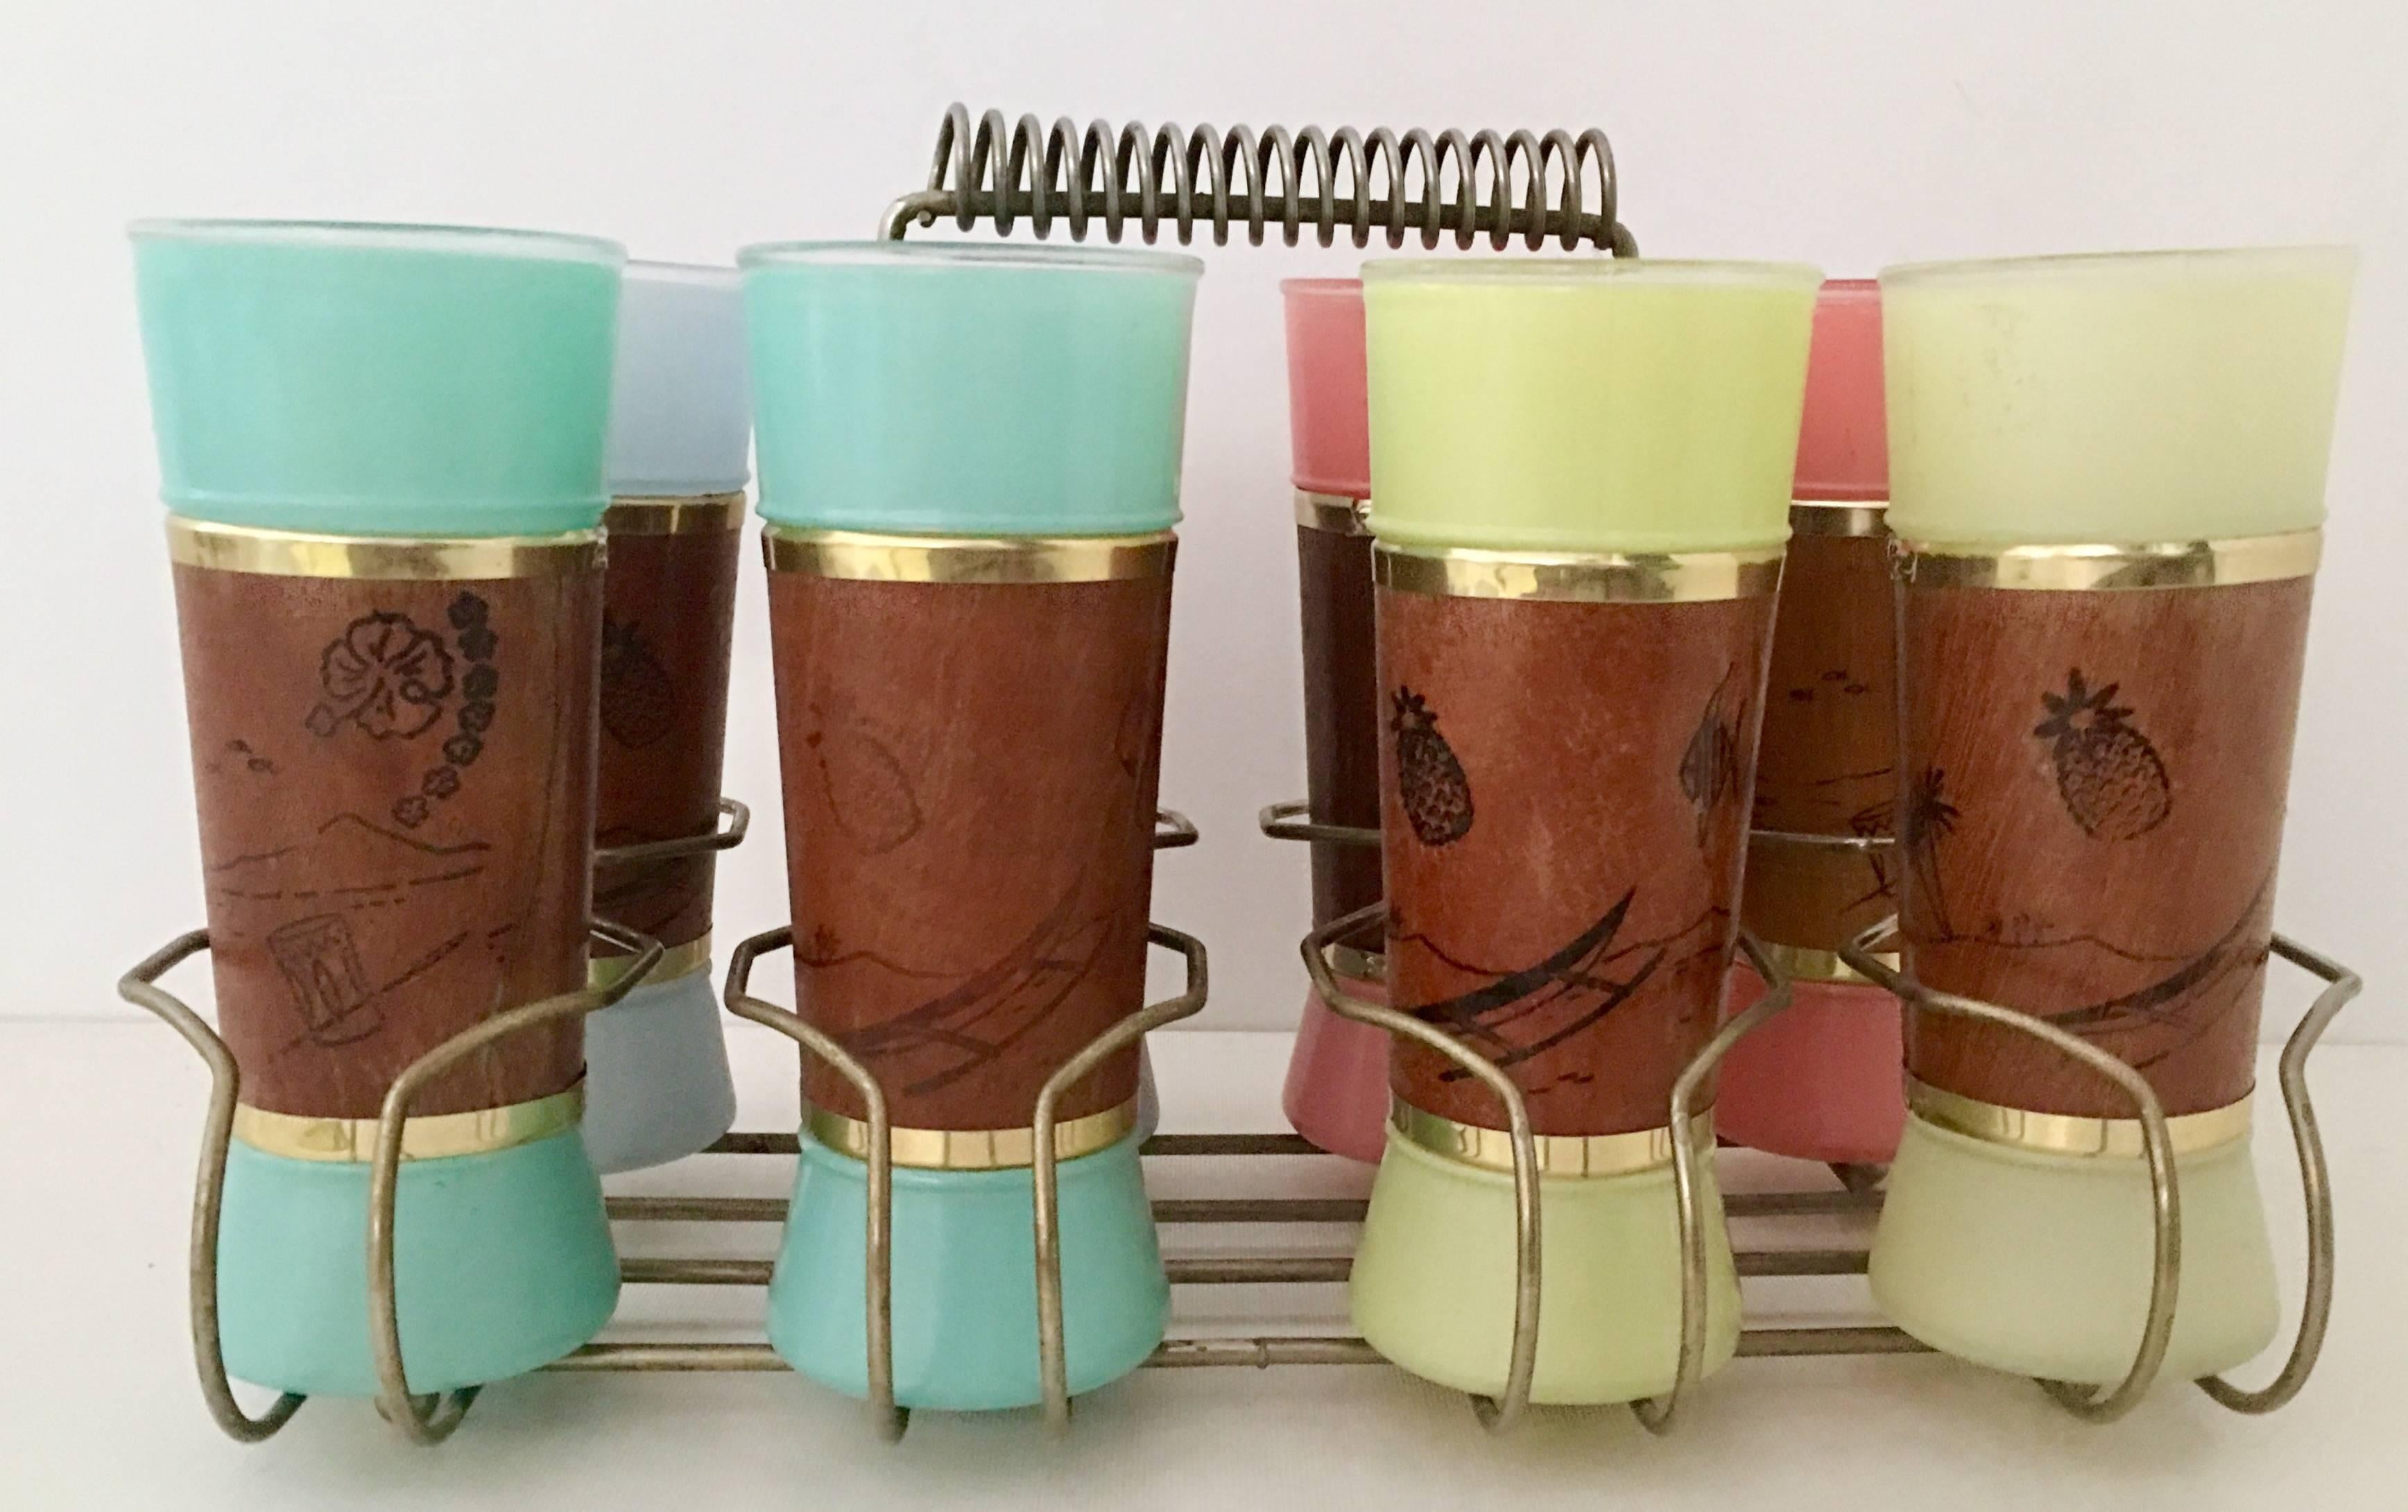 1950'S Hawaiian Luau themed frosted glass and brass mahogany wrap drink glasses with brass and mahogany carrying caddy.
Set includes eight glass tumblers, two in each color way and a eight slot brass and mahogany handle carrying caddy. Each glass is